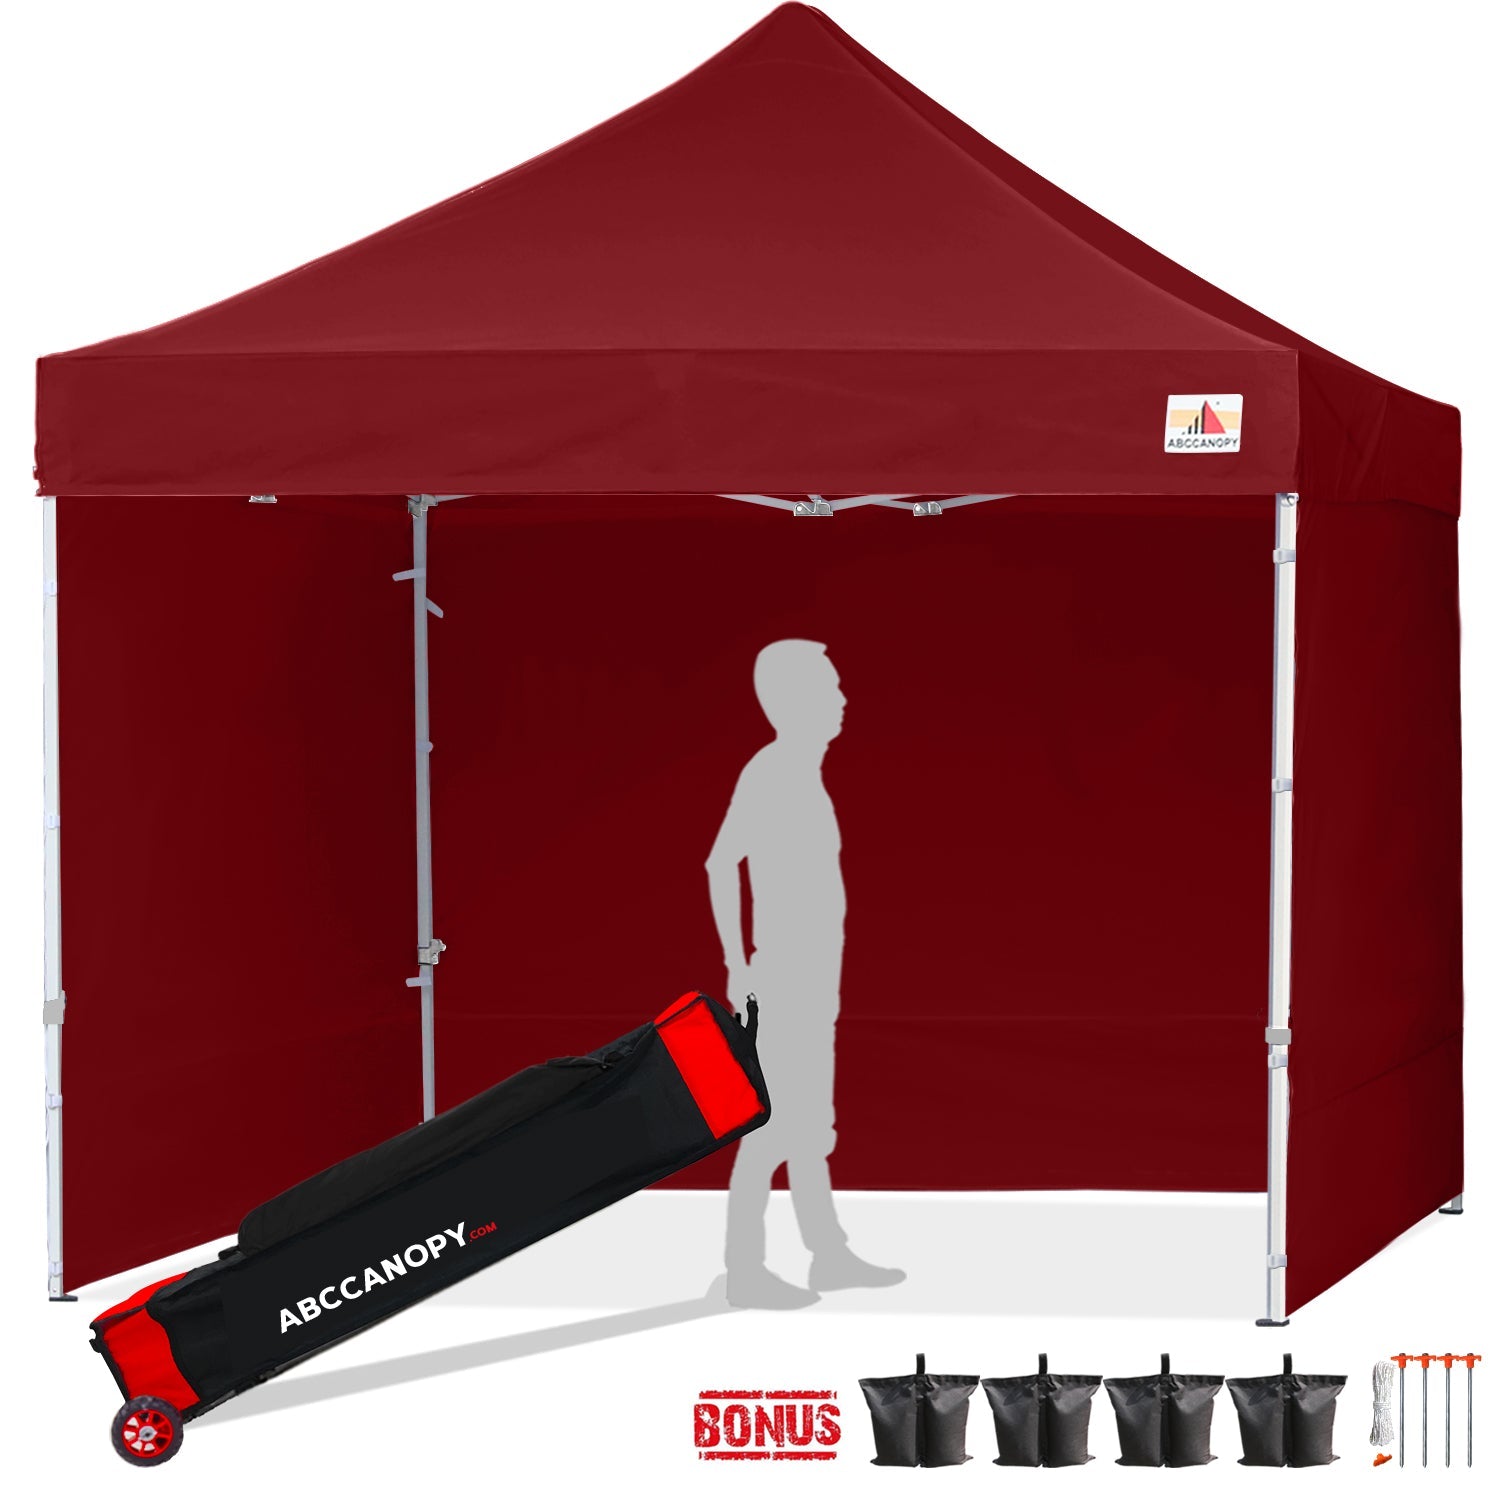 ABCCANOPY 10 ft x 10 ft Metal Pop-Up Commercial Canopy Tent with walls, Burgundy